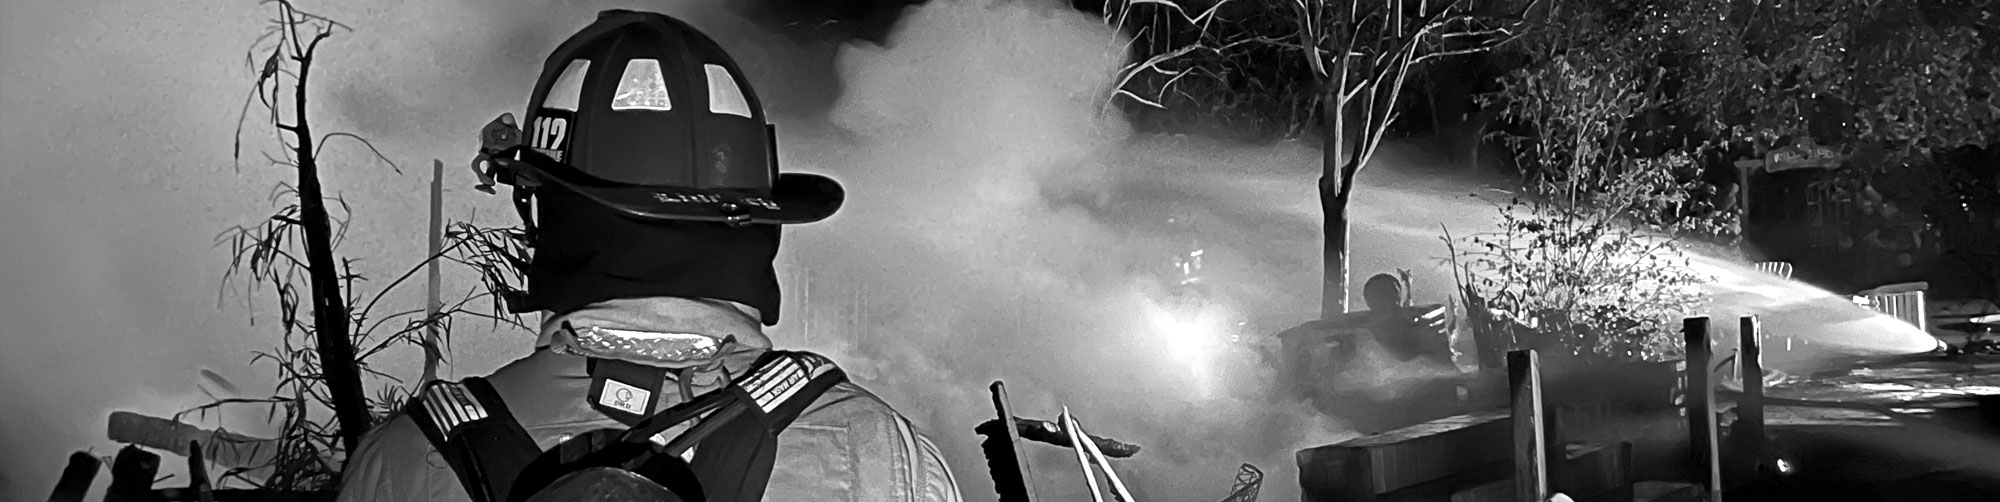 firefighter looking at massive firehose spray